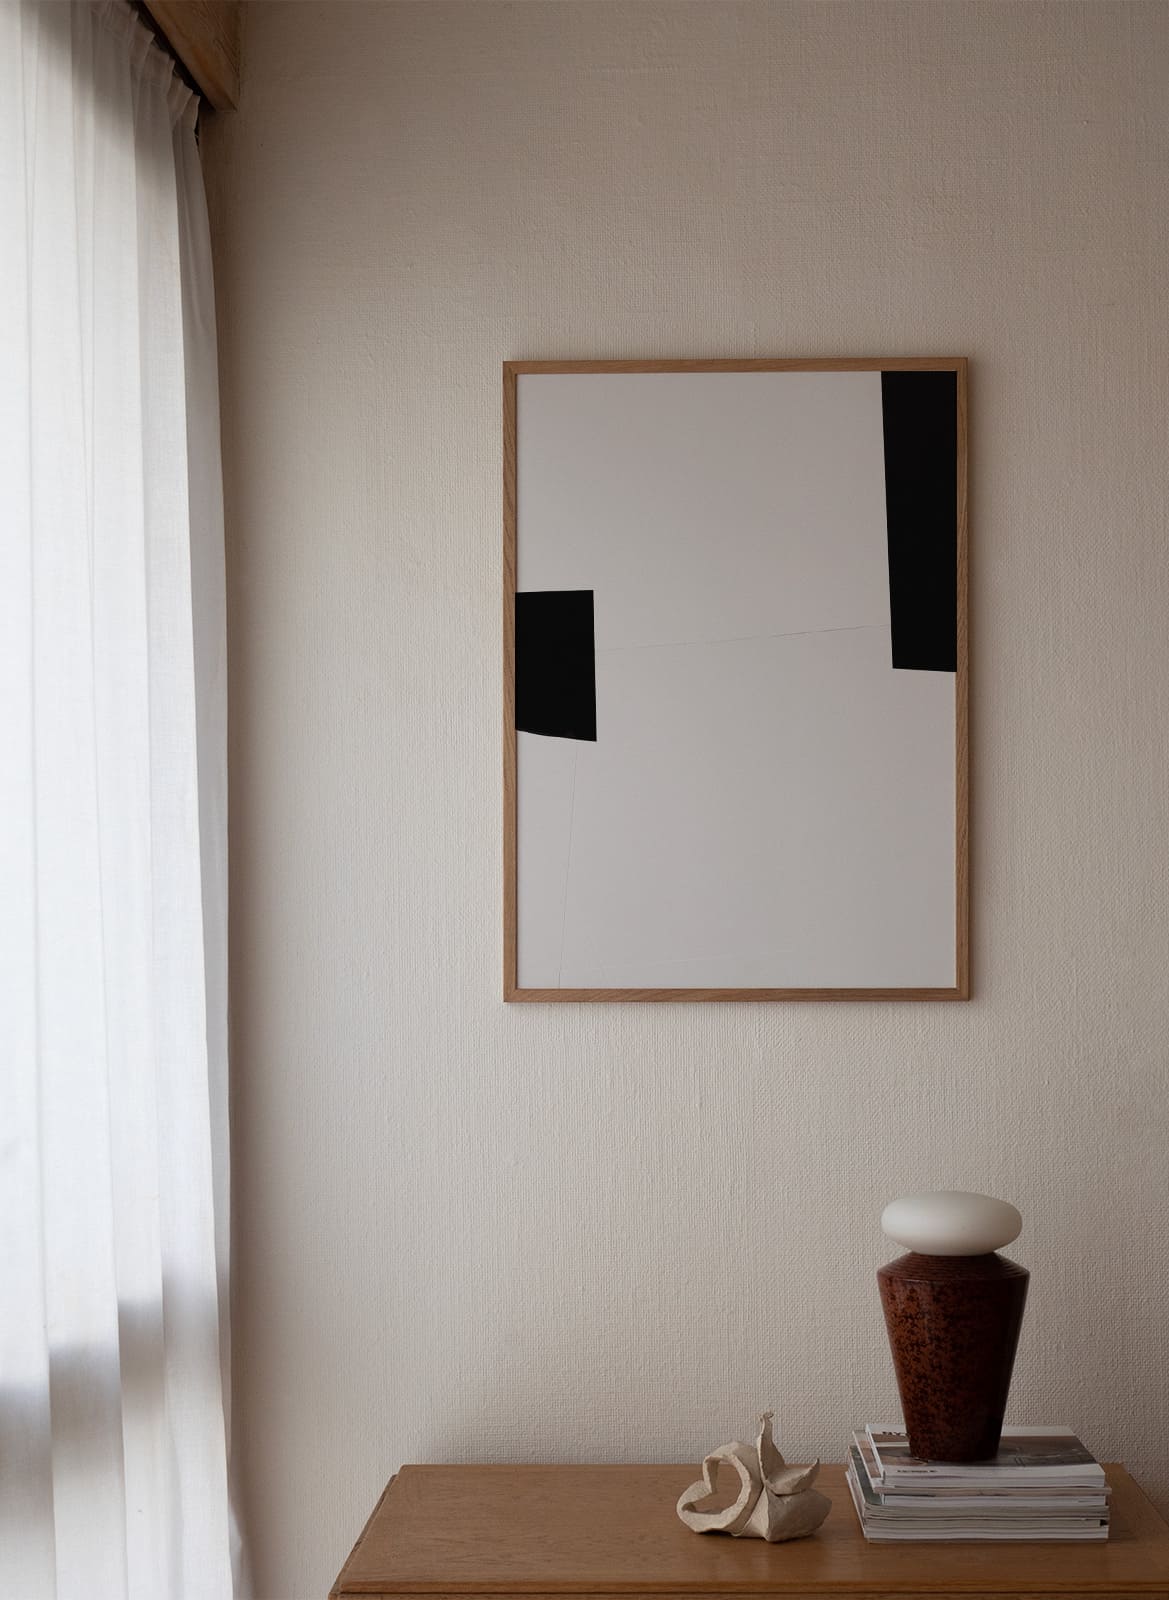 Framed minimalistic poster hanging above a table by atelier cph